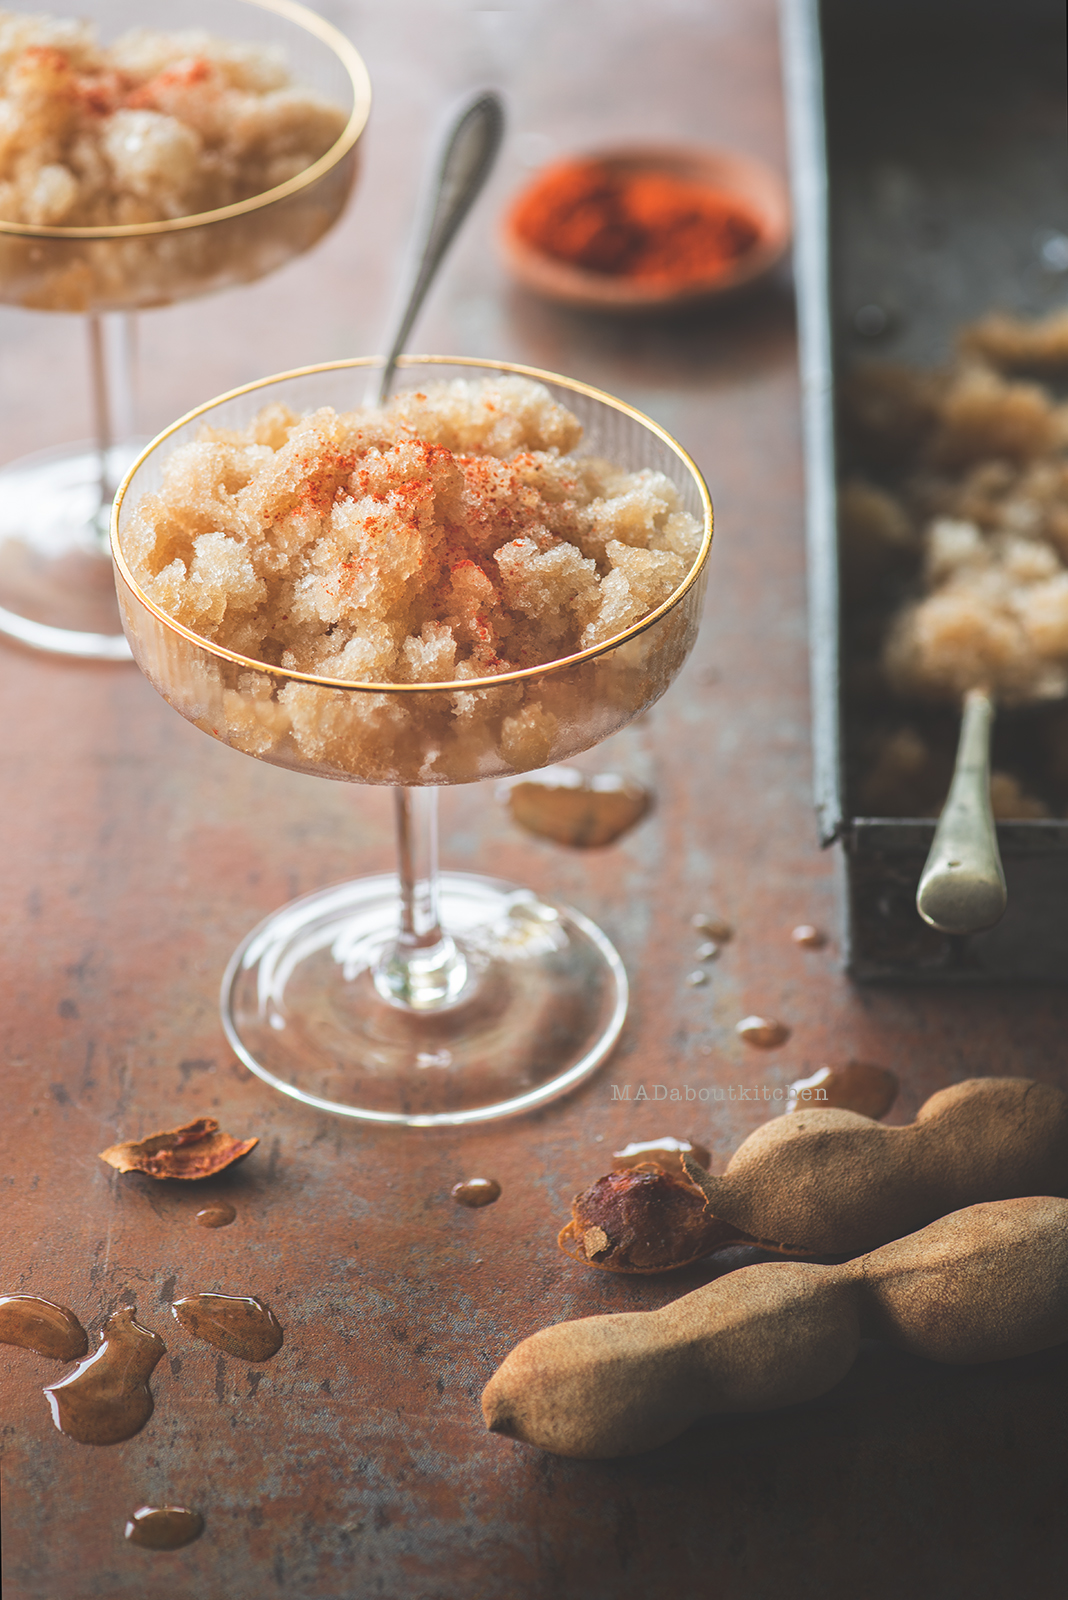 Imli granita , Tamarind granita has a perfect combination of Tangy, sweet, spice and is totally lip smacking. This granita is perfect for scorching summer.